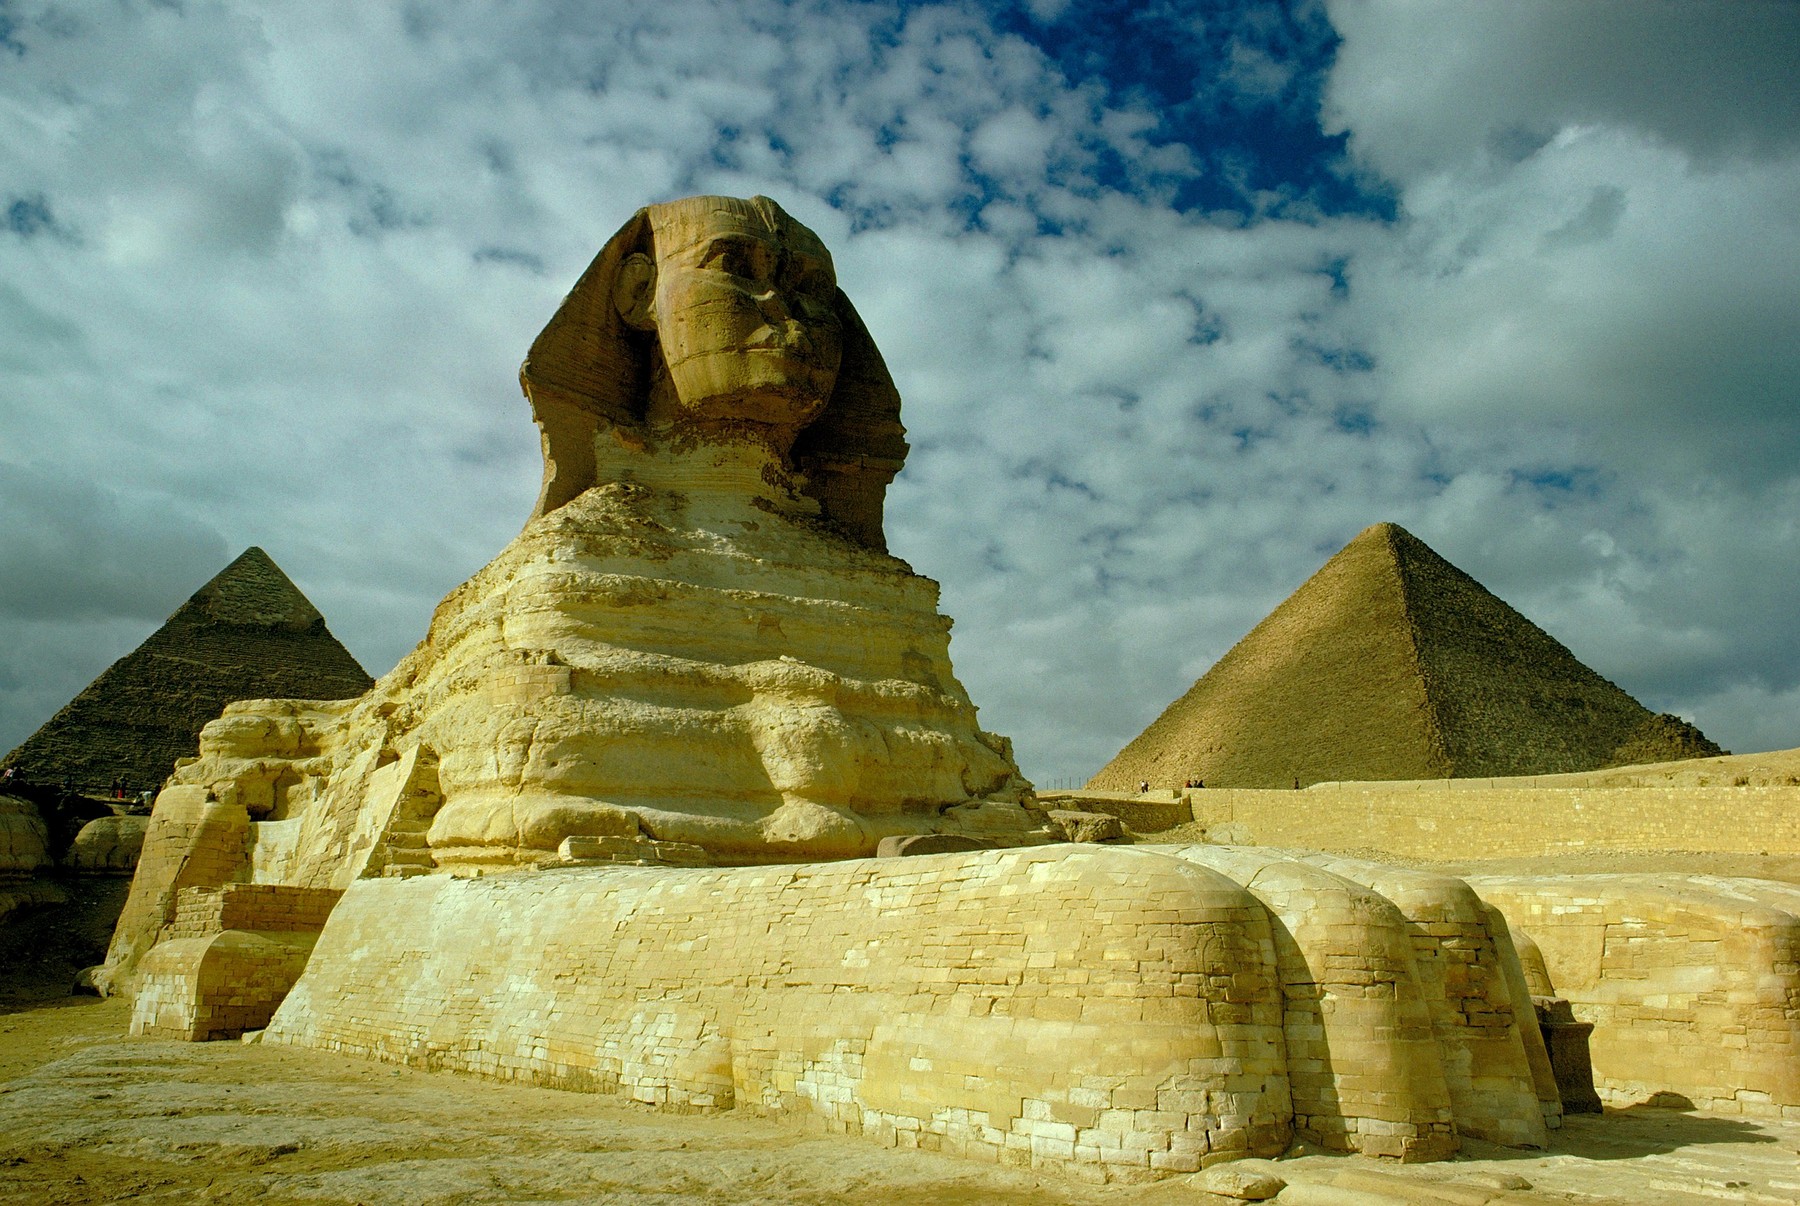 The Egyptian pyramids and Sphinx were closed for an unusual reason